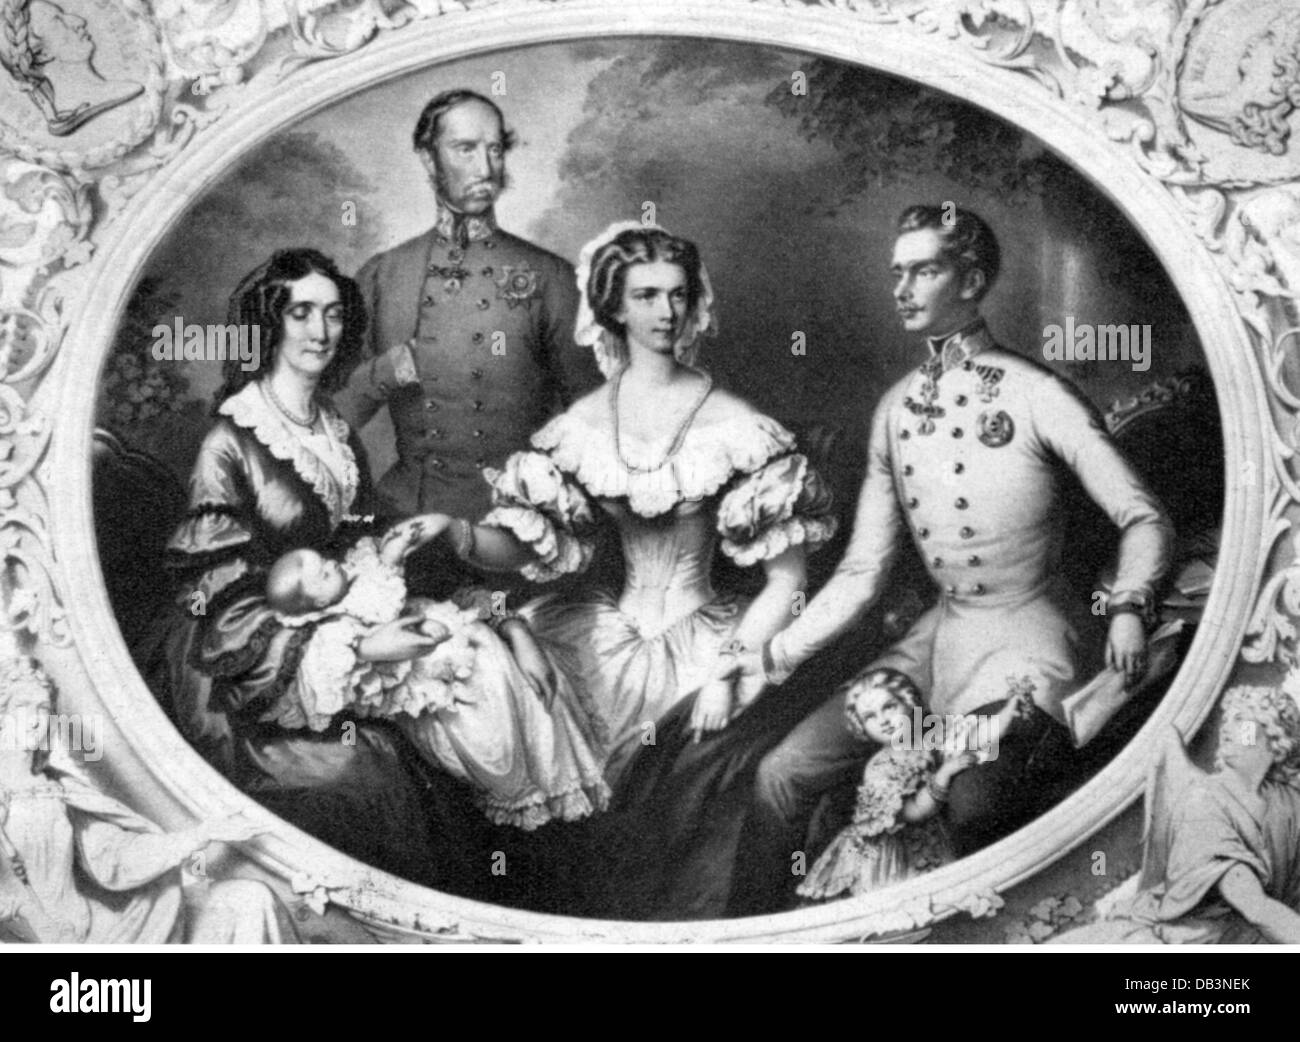 Franz Joseph I, 18.8.1830 - 21.11.1916, Emperor of Austria 2.12.1848 - 21.11.1916, with wife Empress Elisabeth (Sisi), parents Archduke Franz Karl and Archduchess Sophie, children Archduchess Sophie and Archduchess Gisela, after lithograph, 1856, Stock Photo